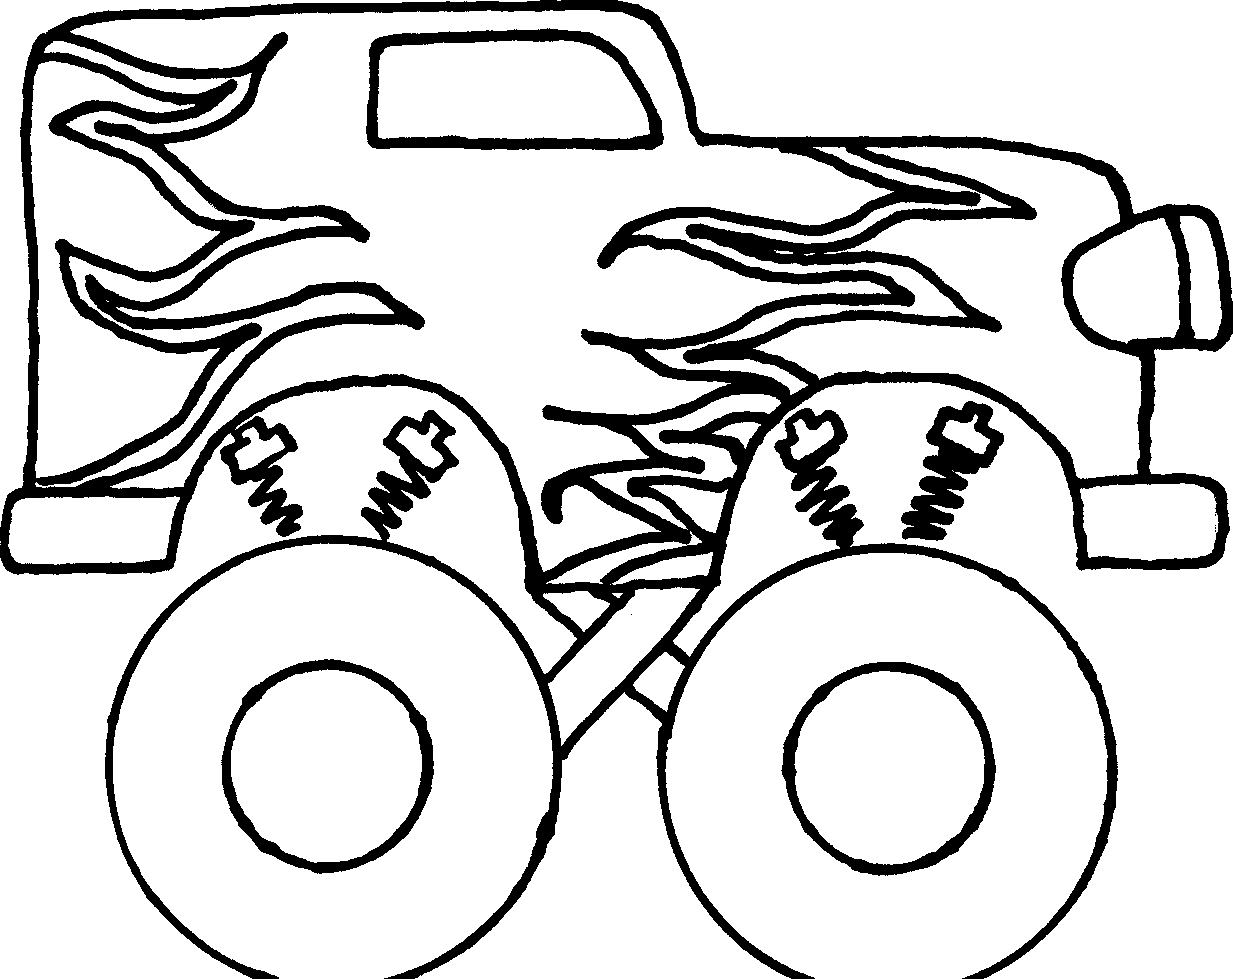 Truck  black and white monster truck clipart black and white free